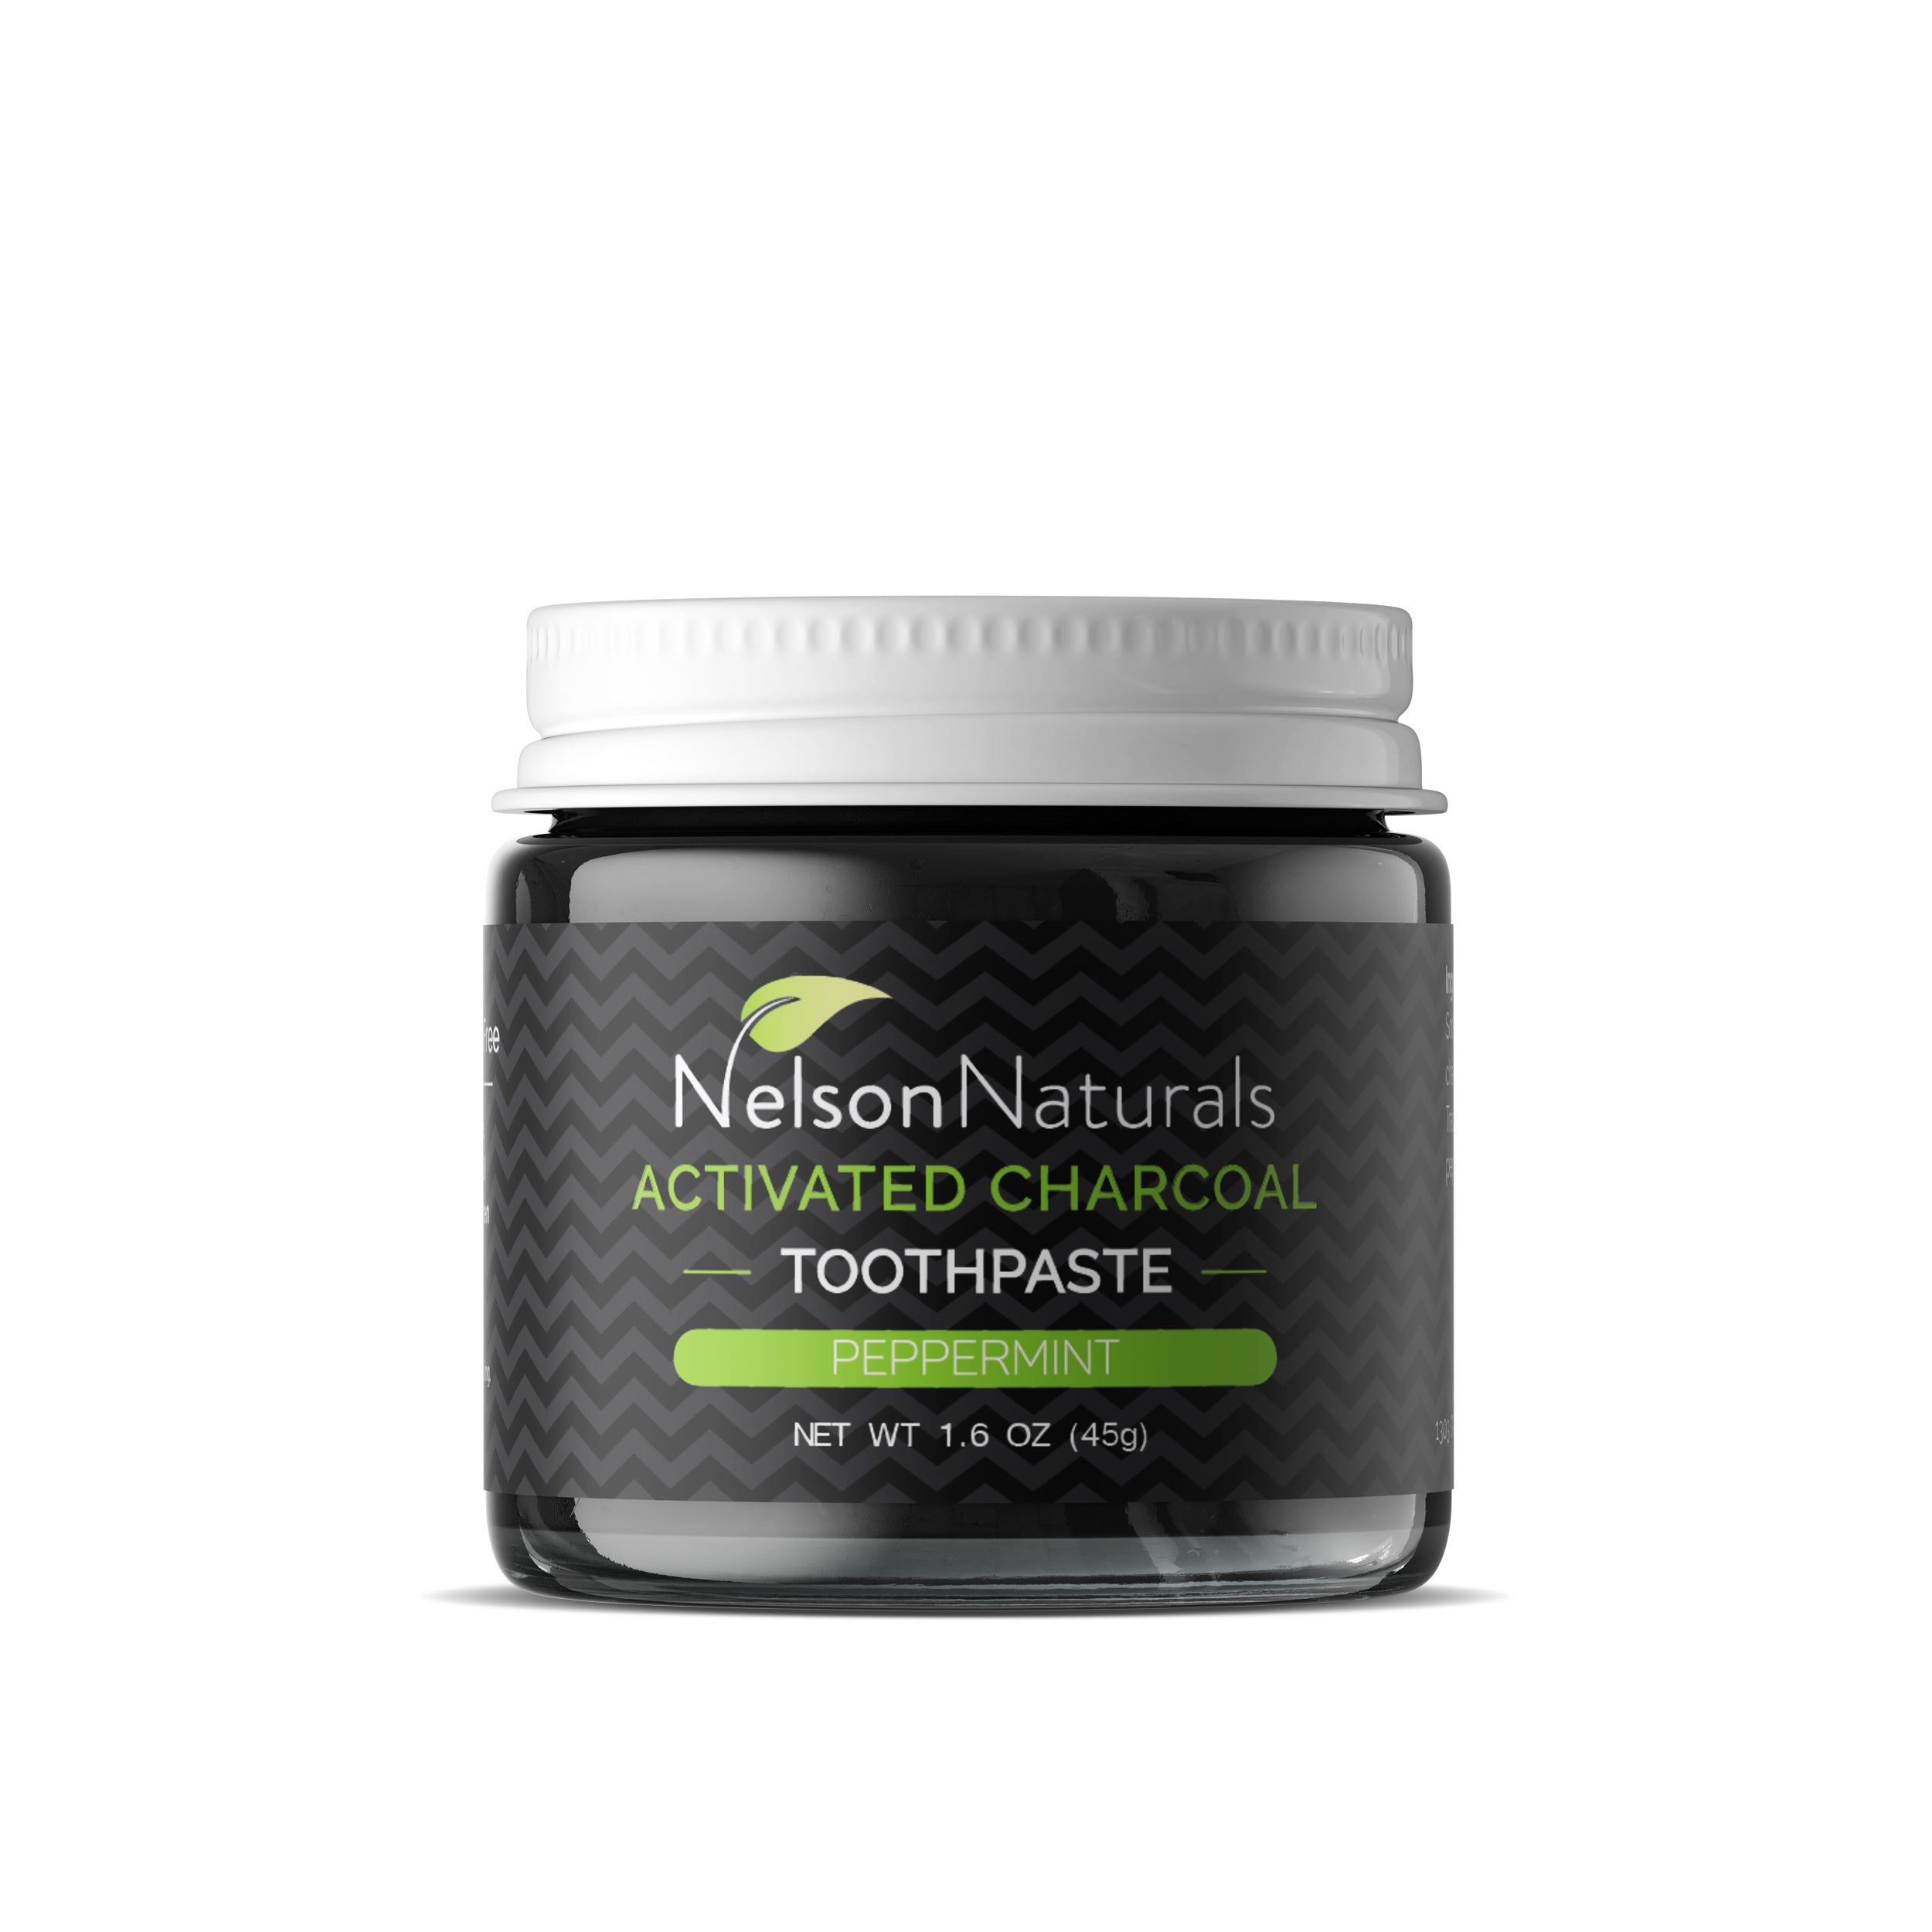 Activated Charcoal Whitening Toothpaste 45g Toothpaste - nelsonnaturals remineralizing toothpaste